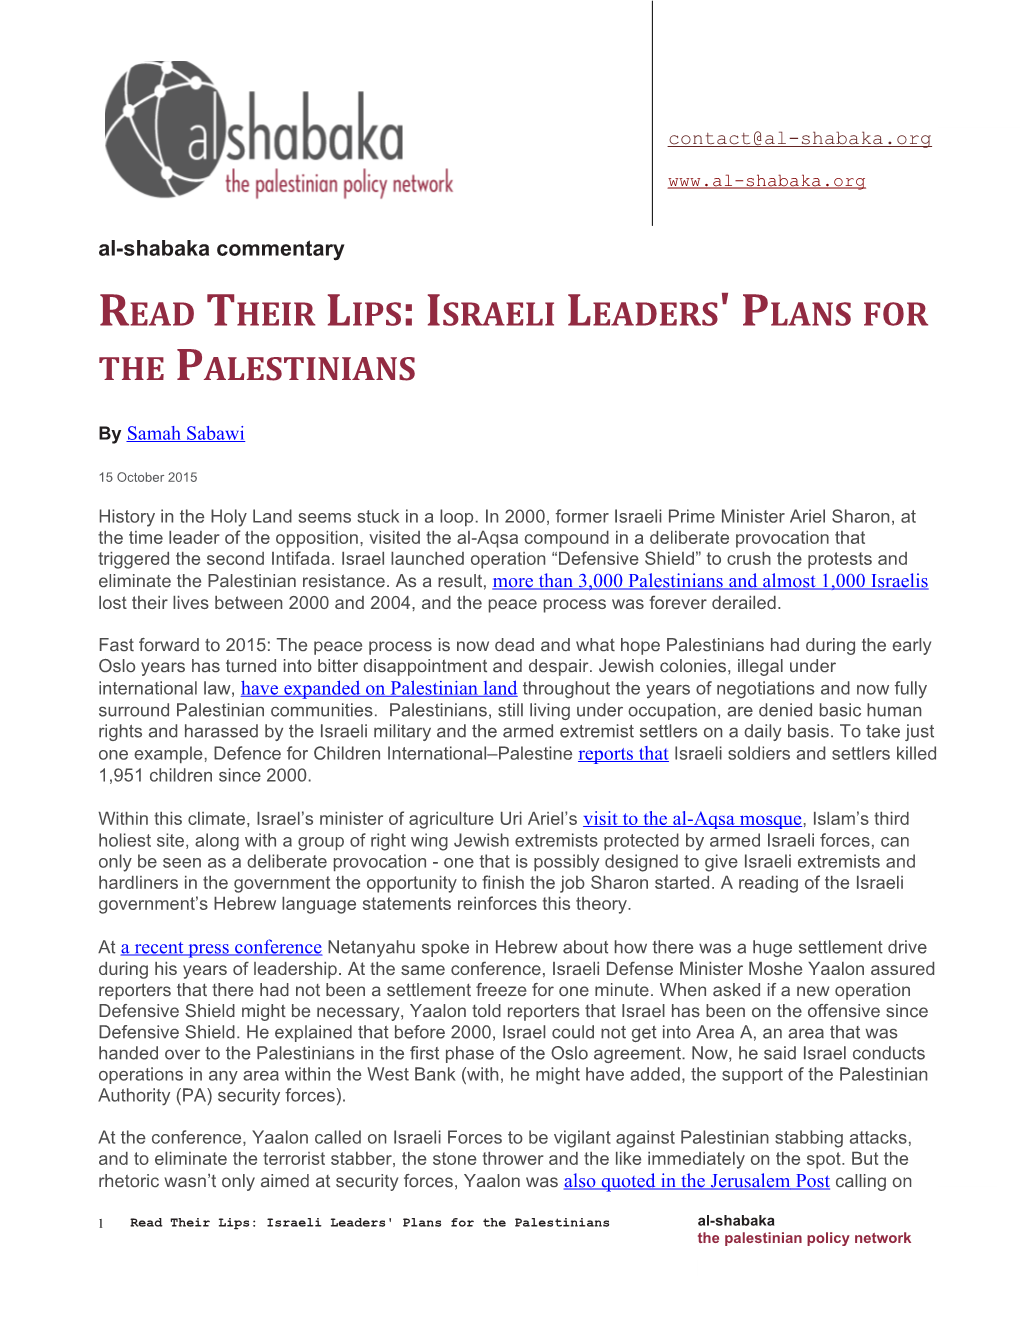 Israeli Leaders' Plans for the Palestinians